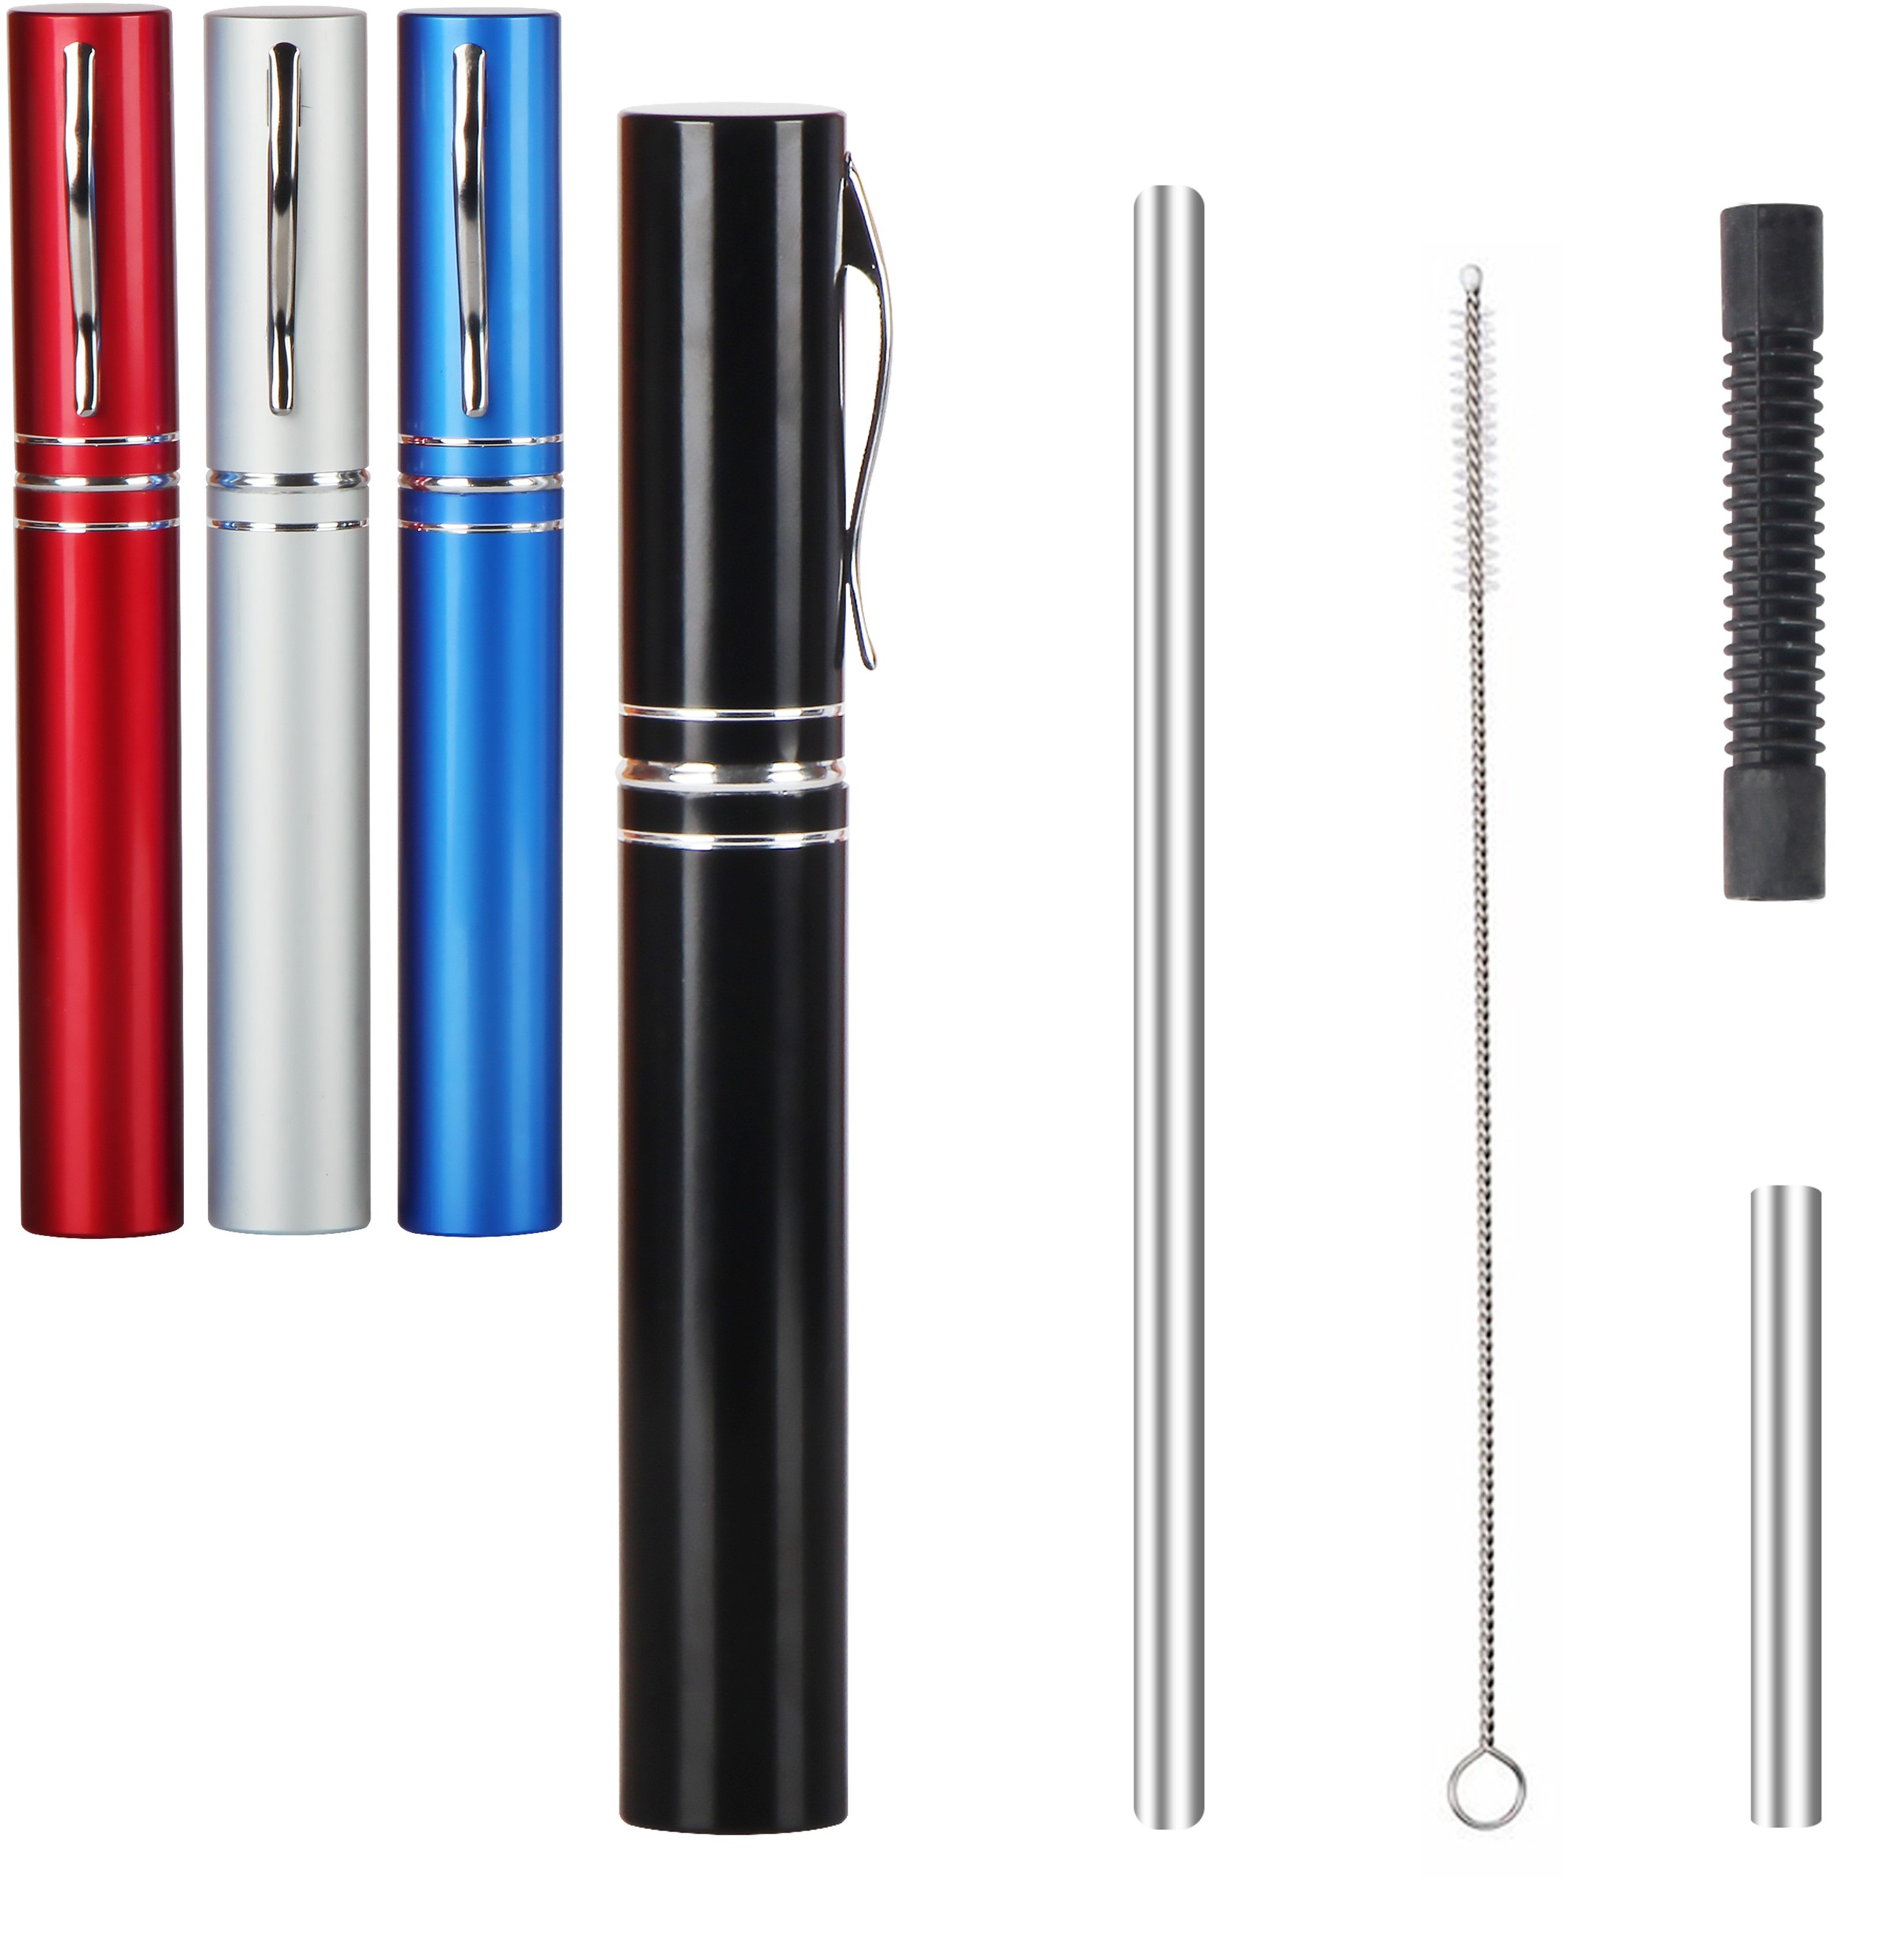 Flexible Stainless Steel Straw Set